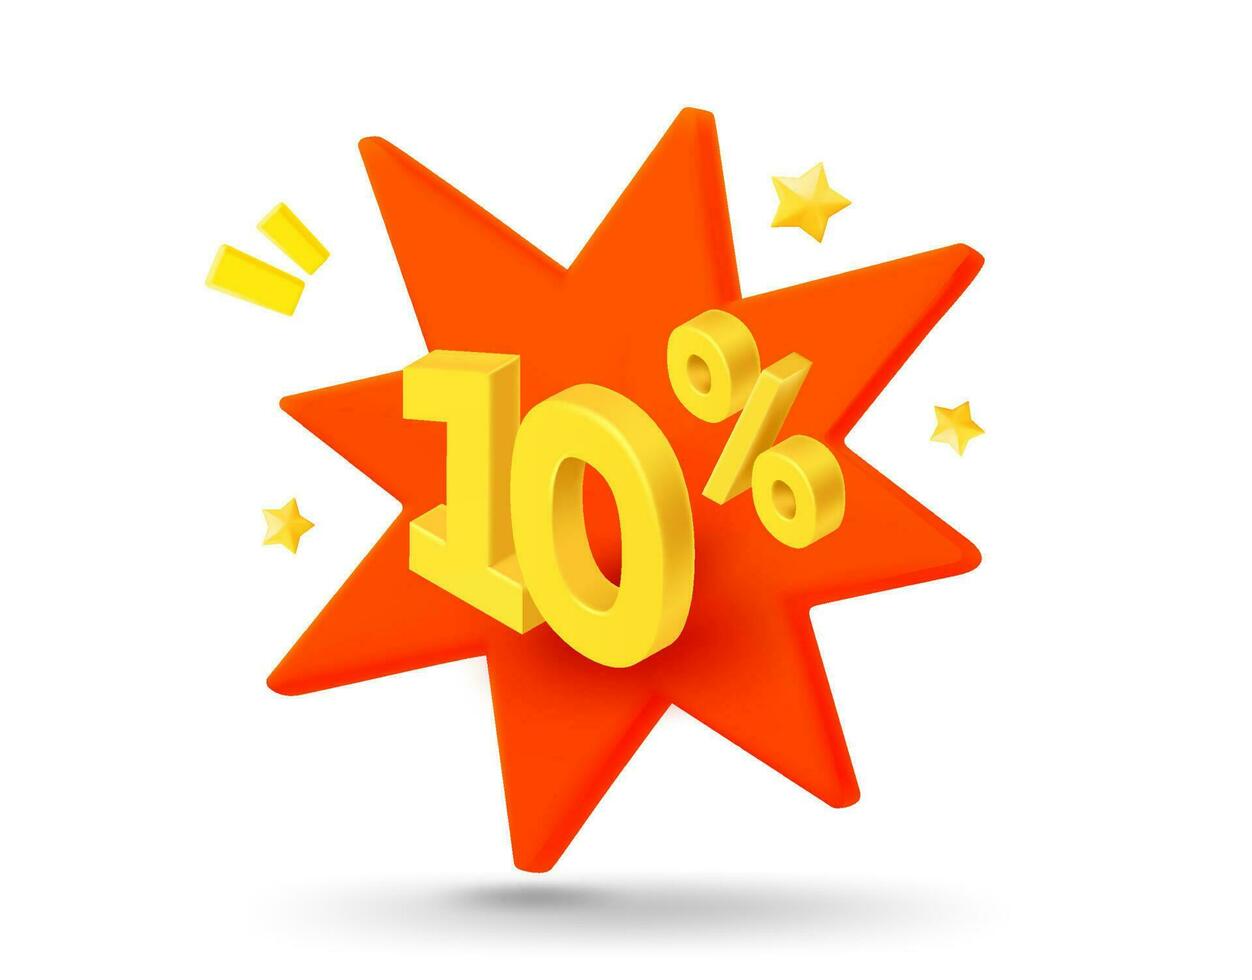 10 percent sale. Shining gold digits with flash effect. Season Discount concept. 3d vector banner